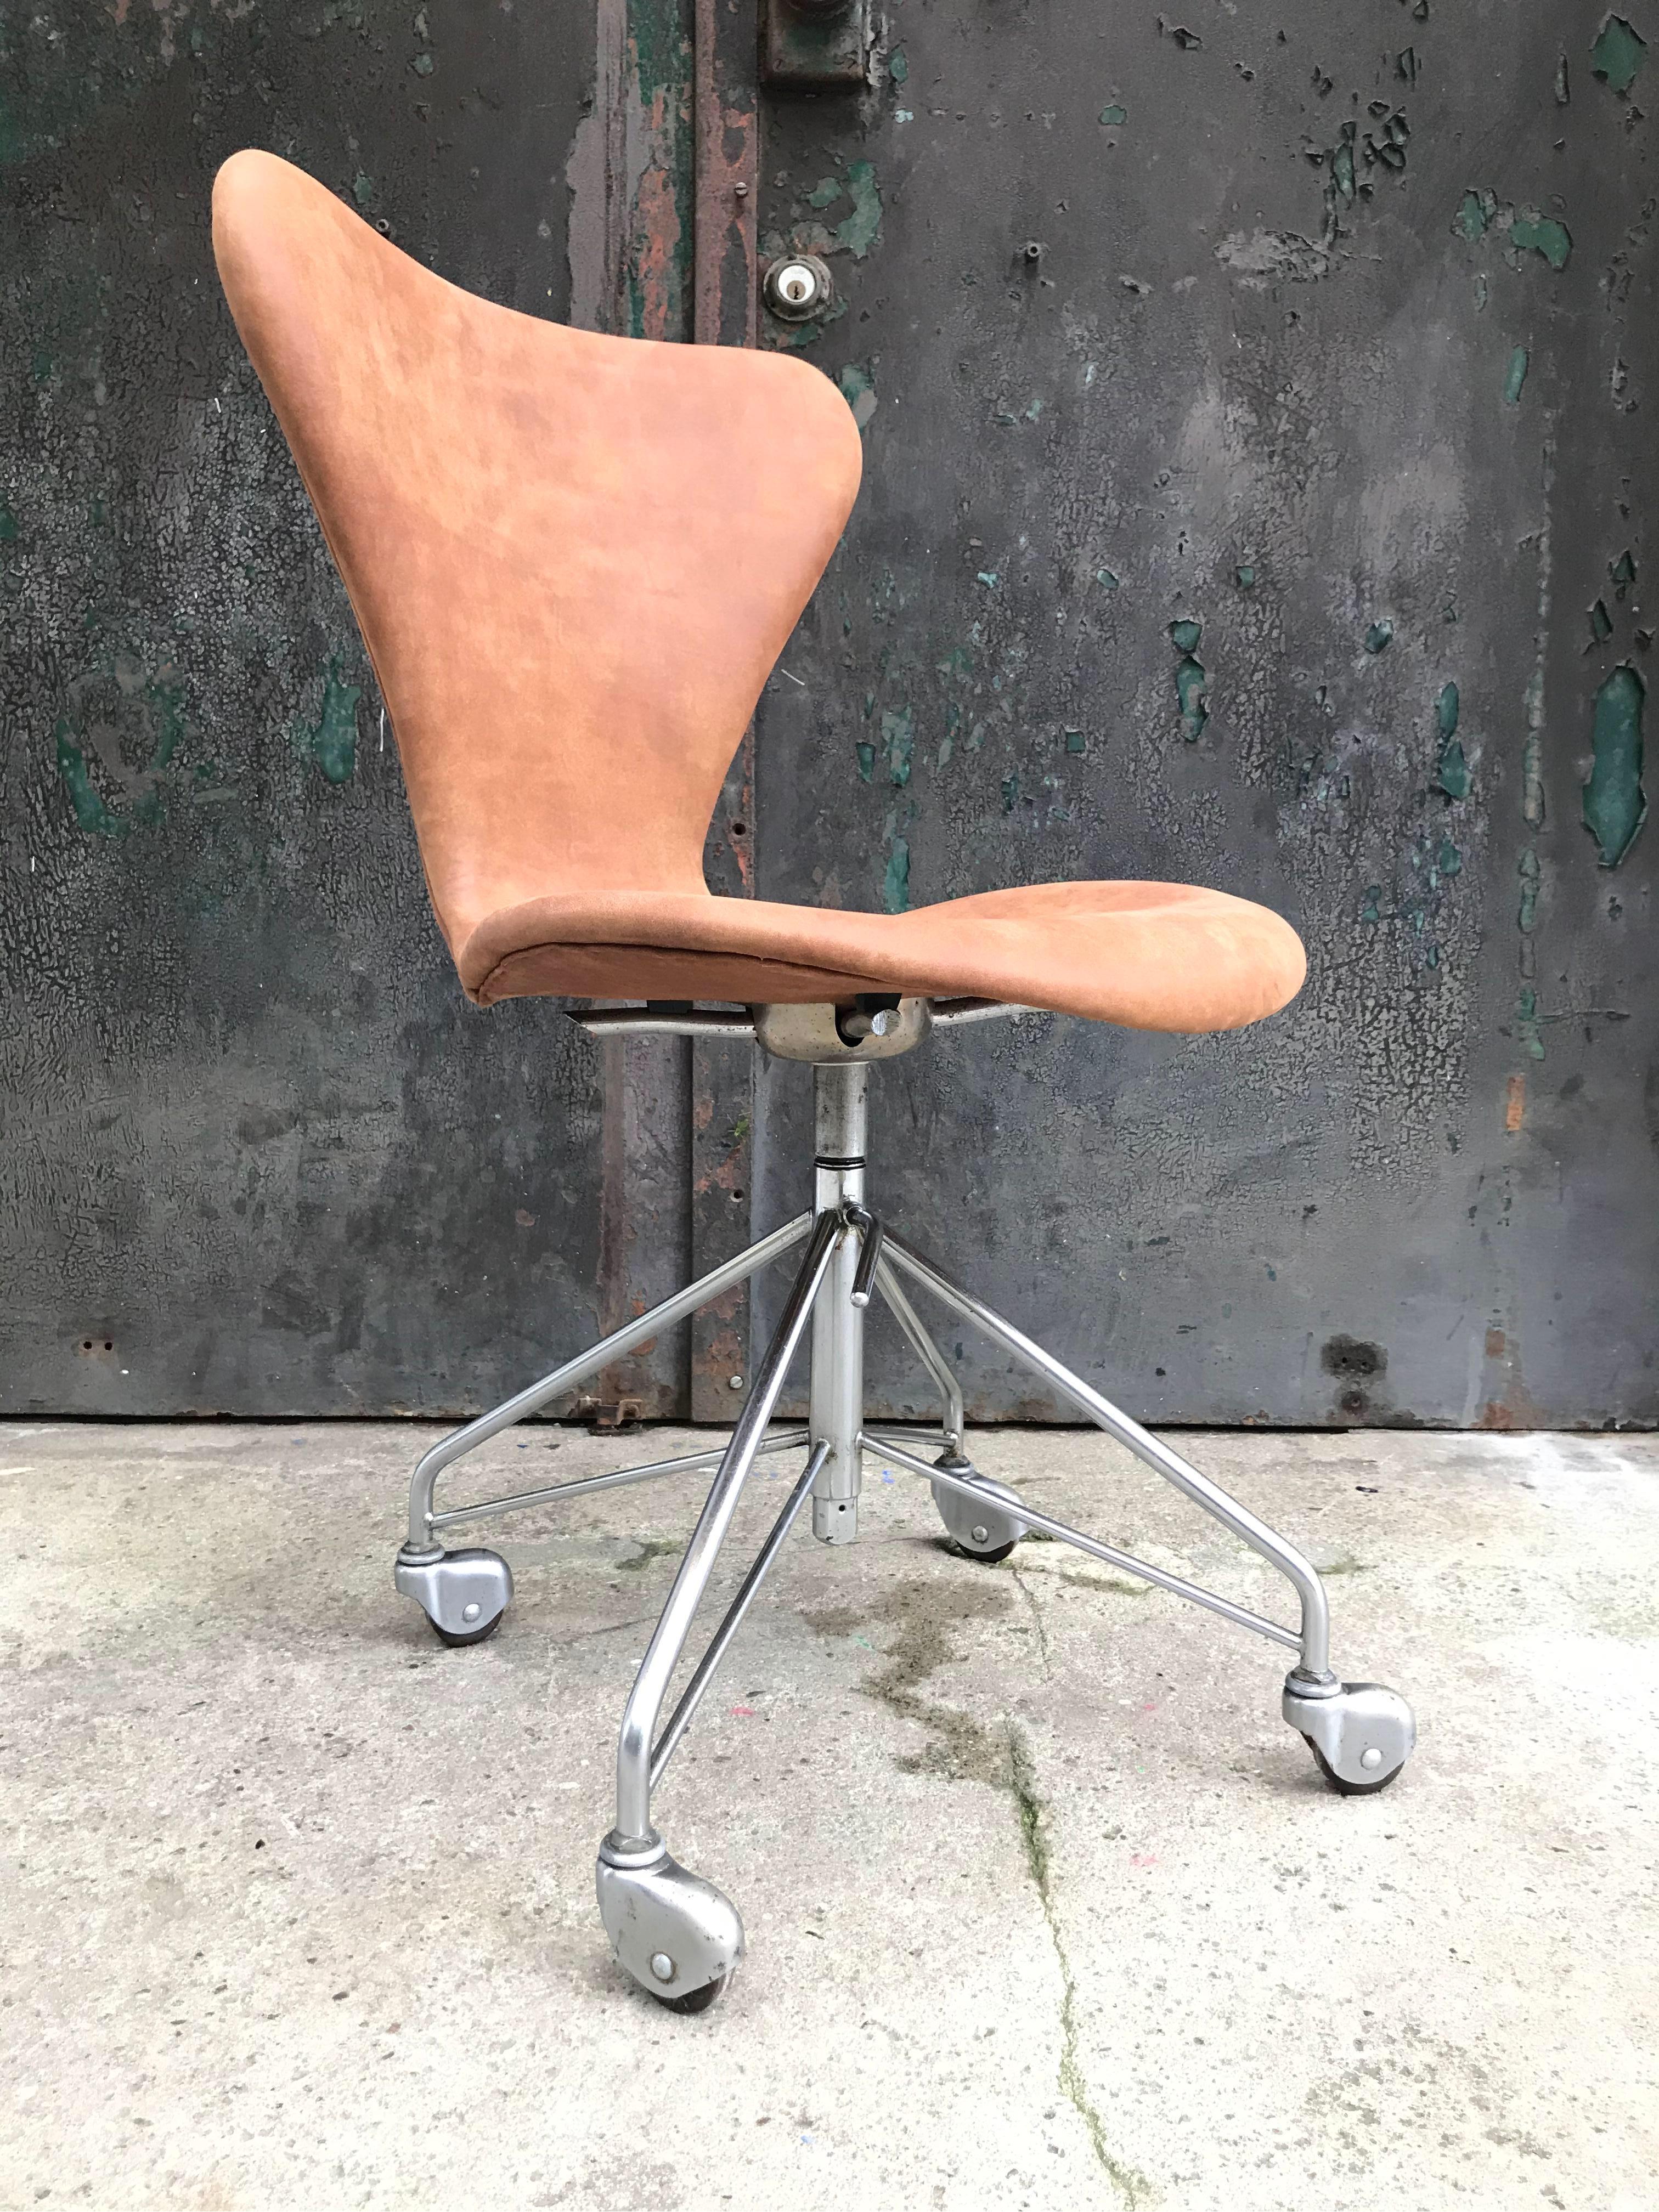 Vintage Arne Jacobsen office swivel stool chair model 3117 from the 1960s
This stool is in great vintage condition
Just back from reupholstering in tan anilin leather
Everything has been checked and the chair is ready to use 
Adjustable height